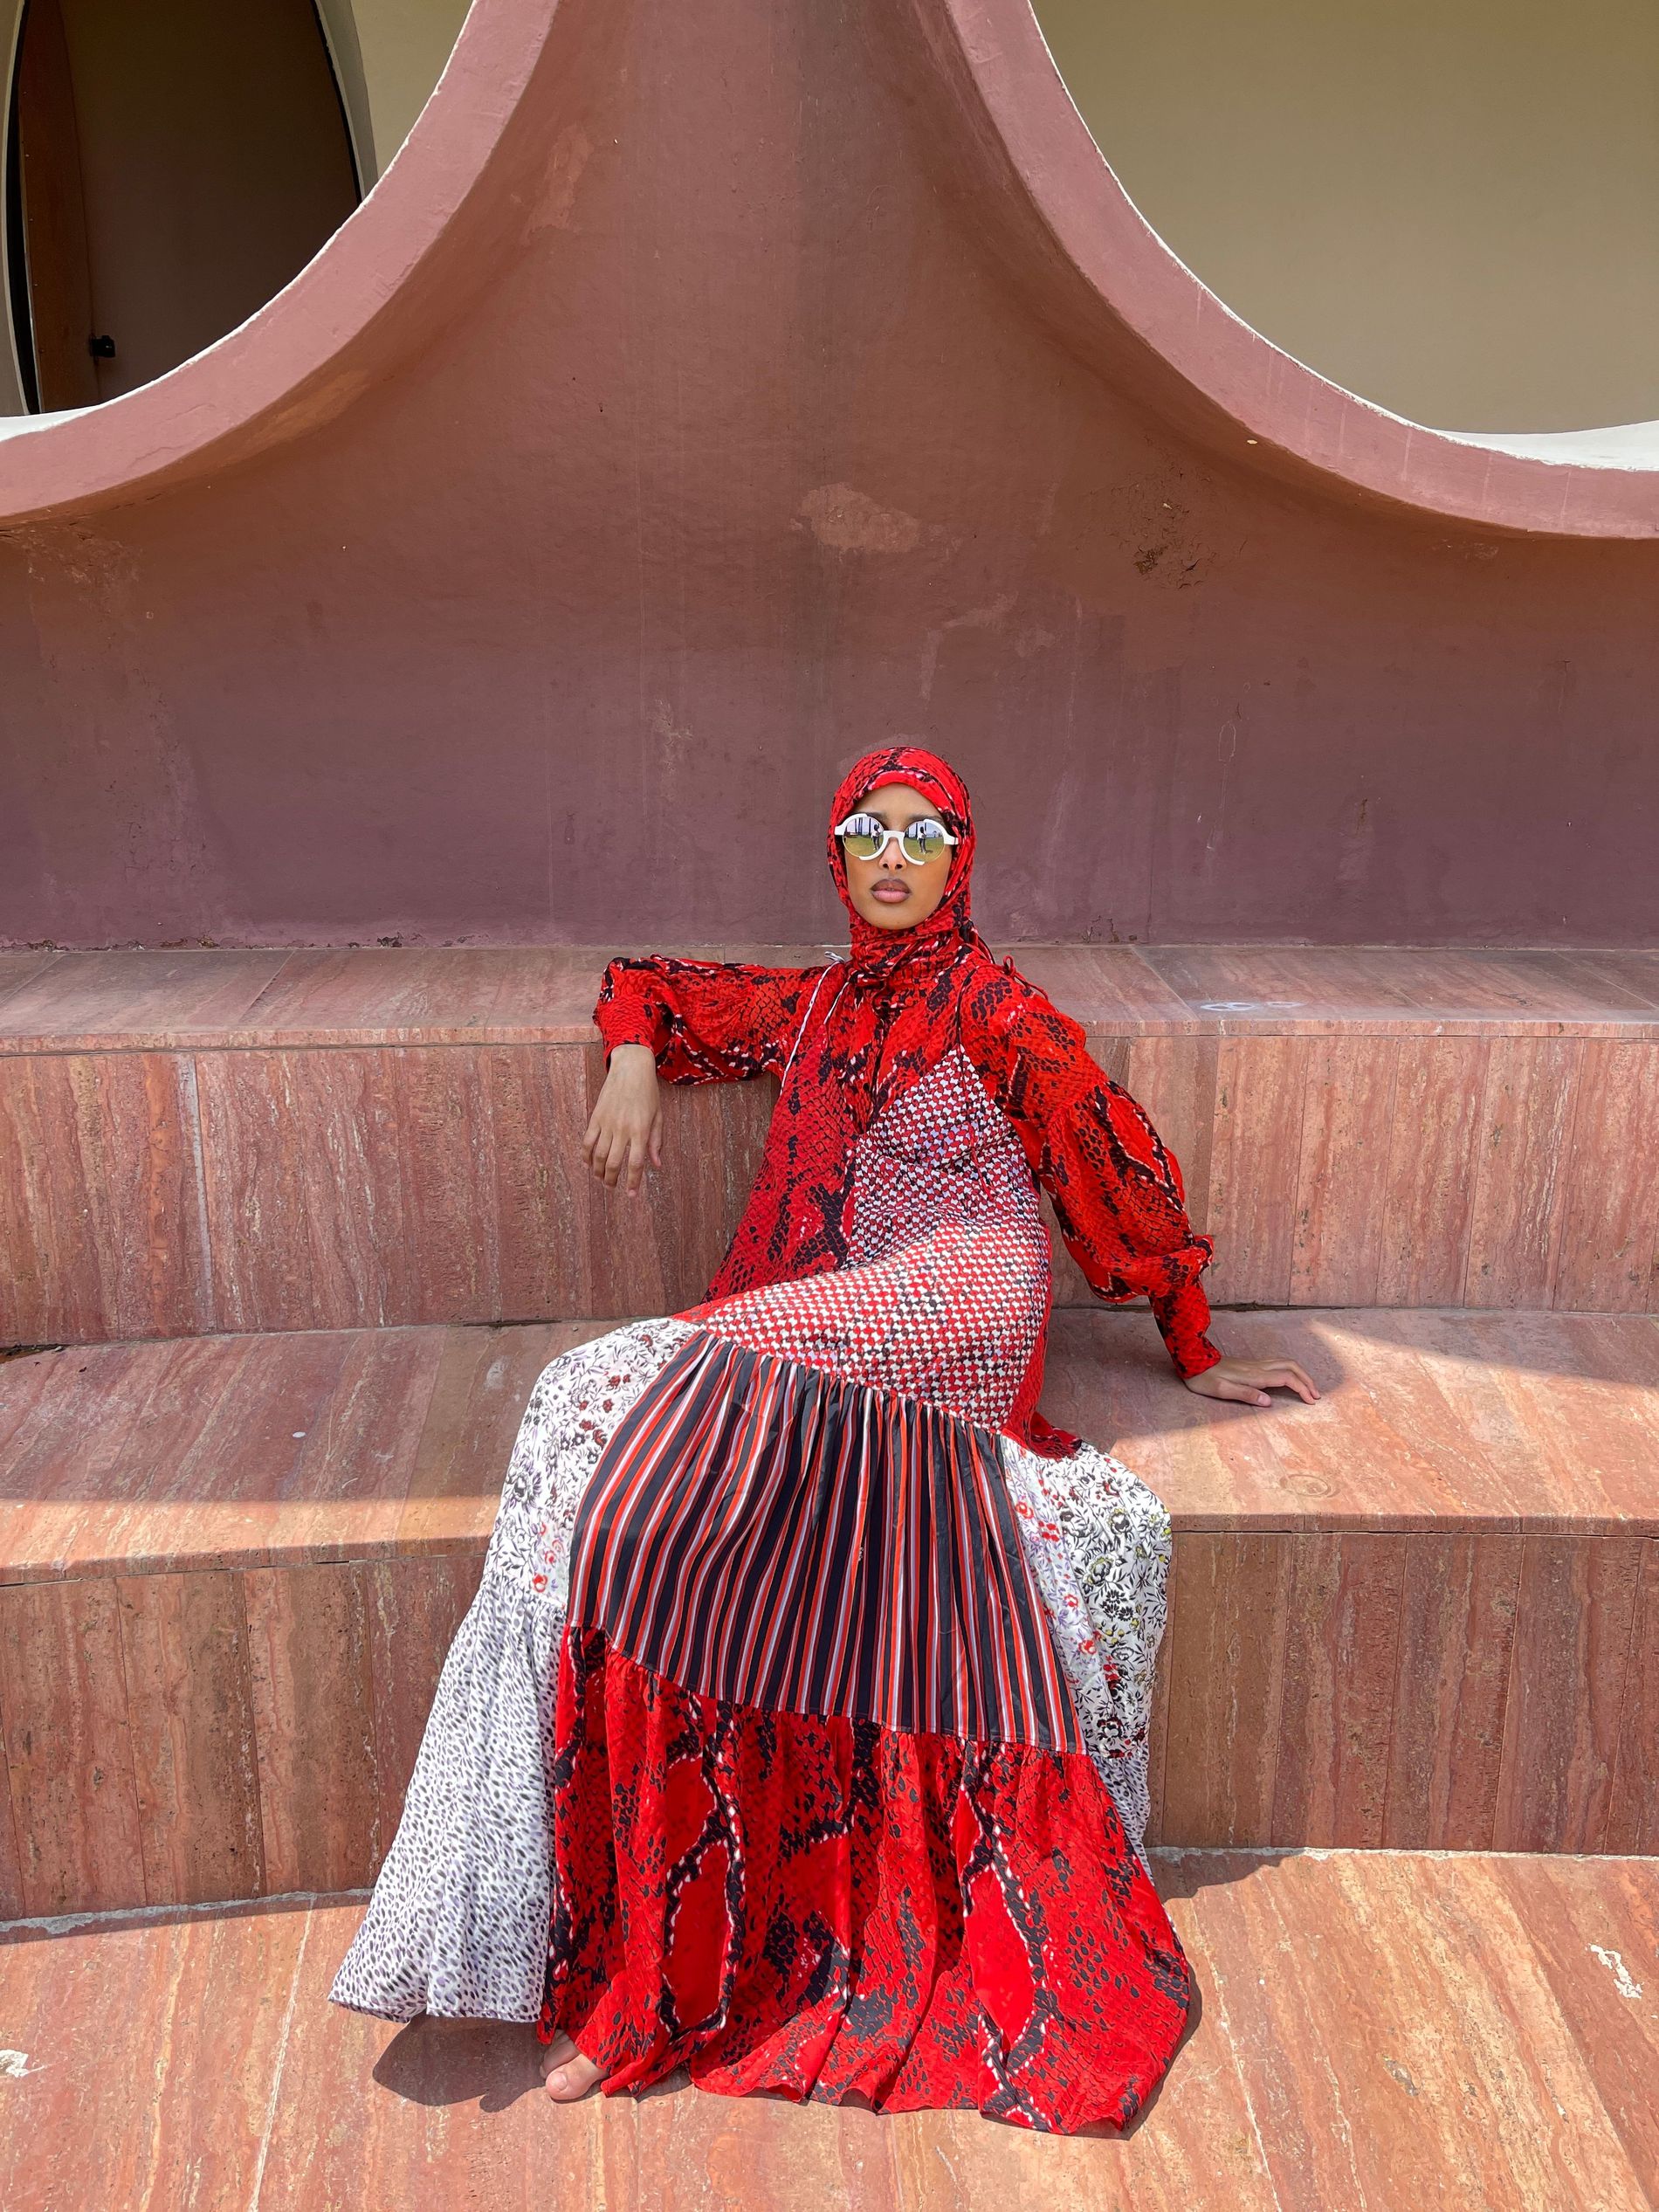 Rawdah Mohamed red outfit